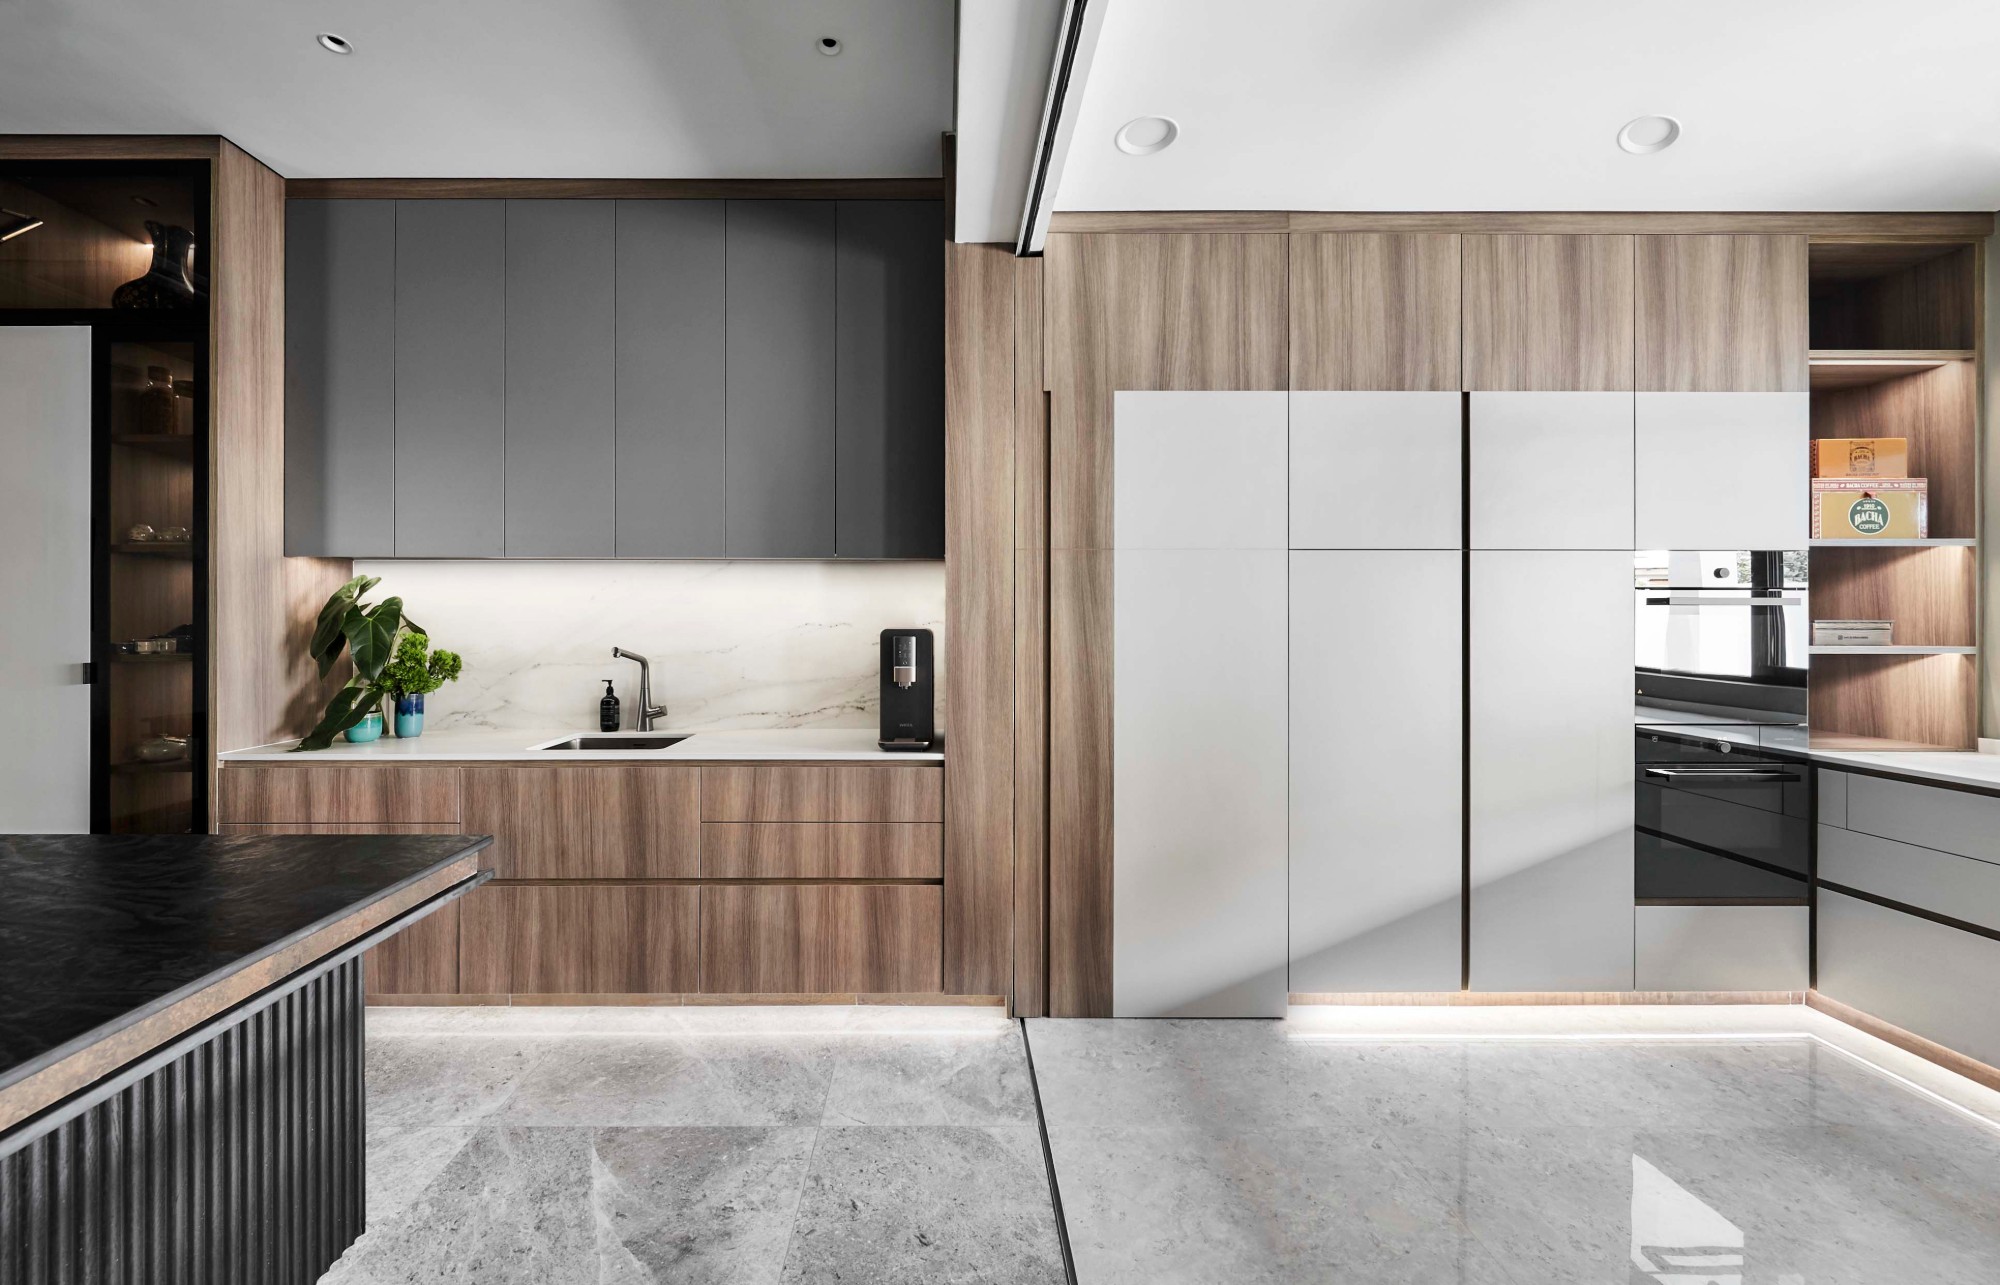 Image of Kitchen 2 in A house full of elegant and timeless contrasts - Cosentino